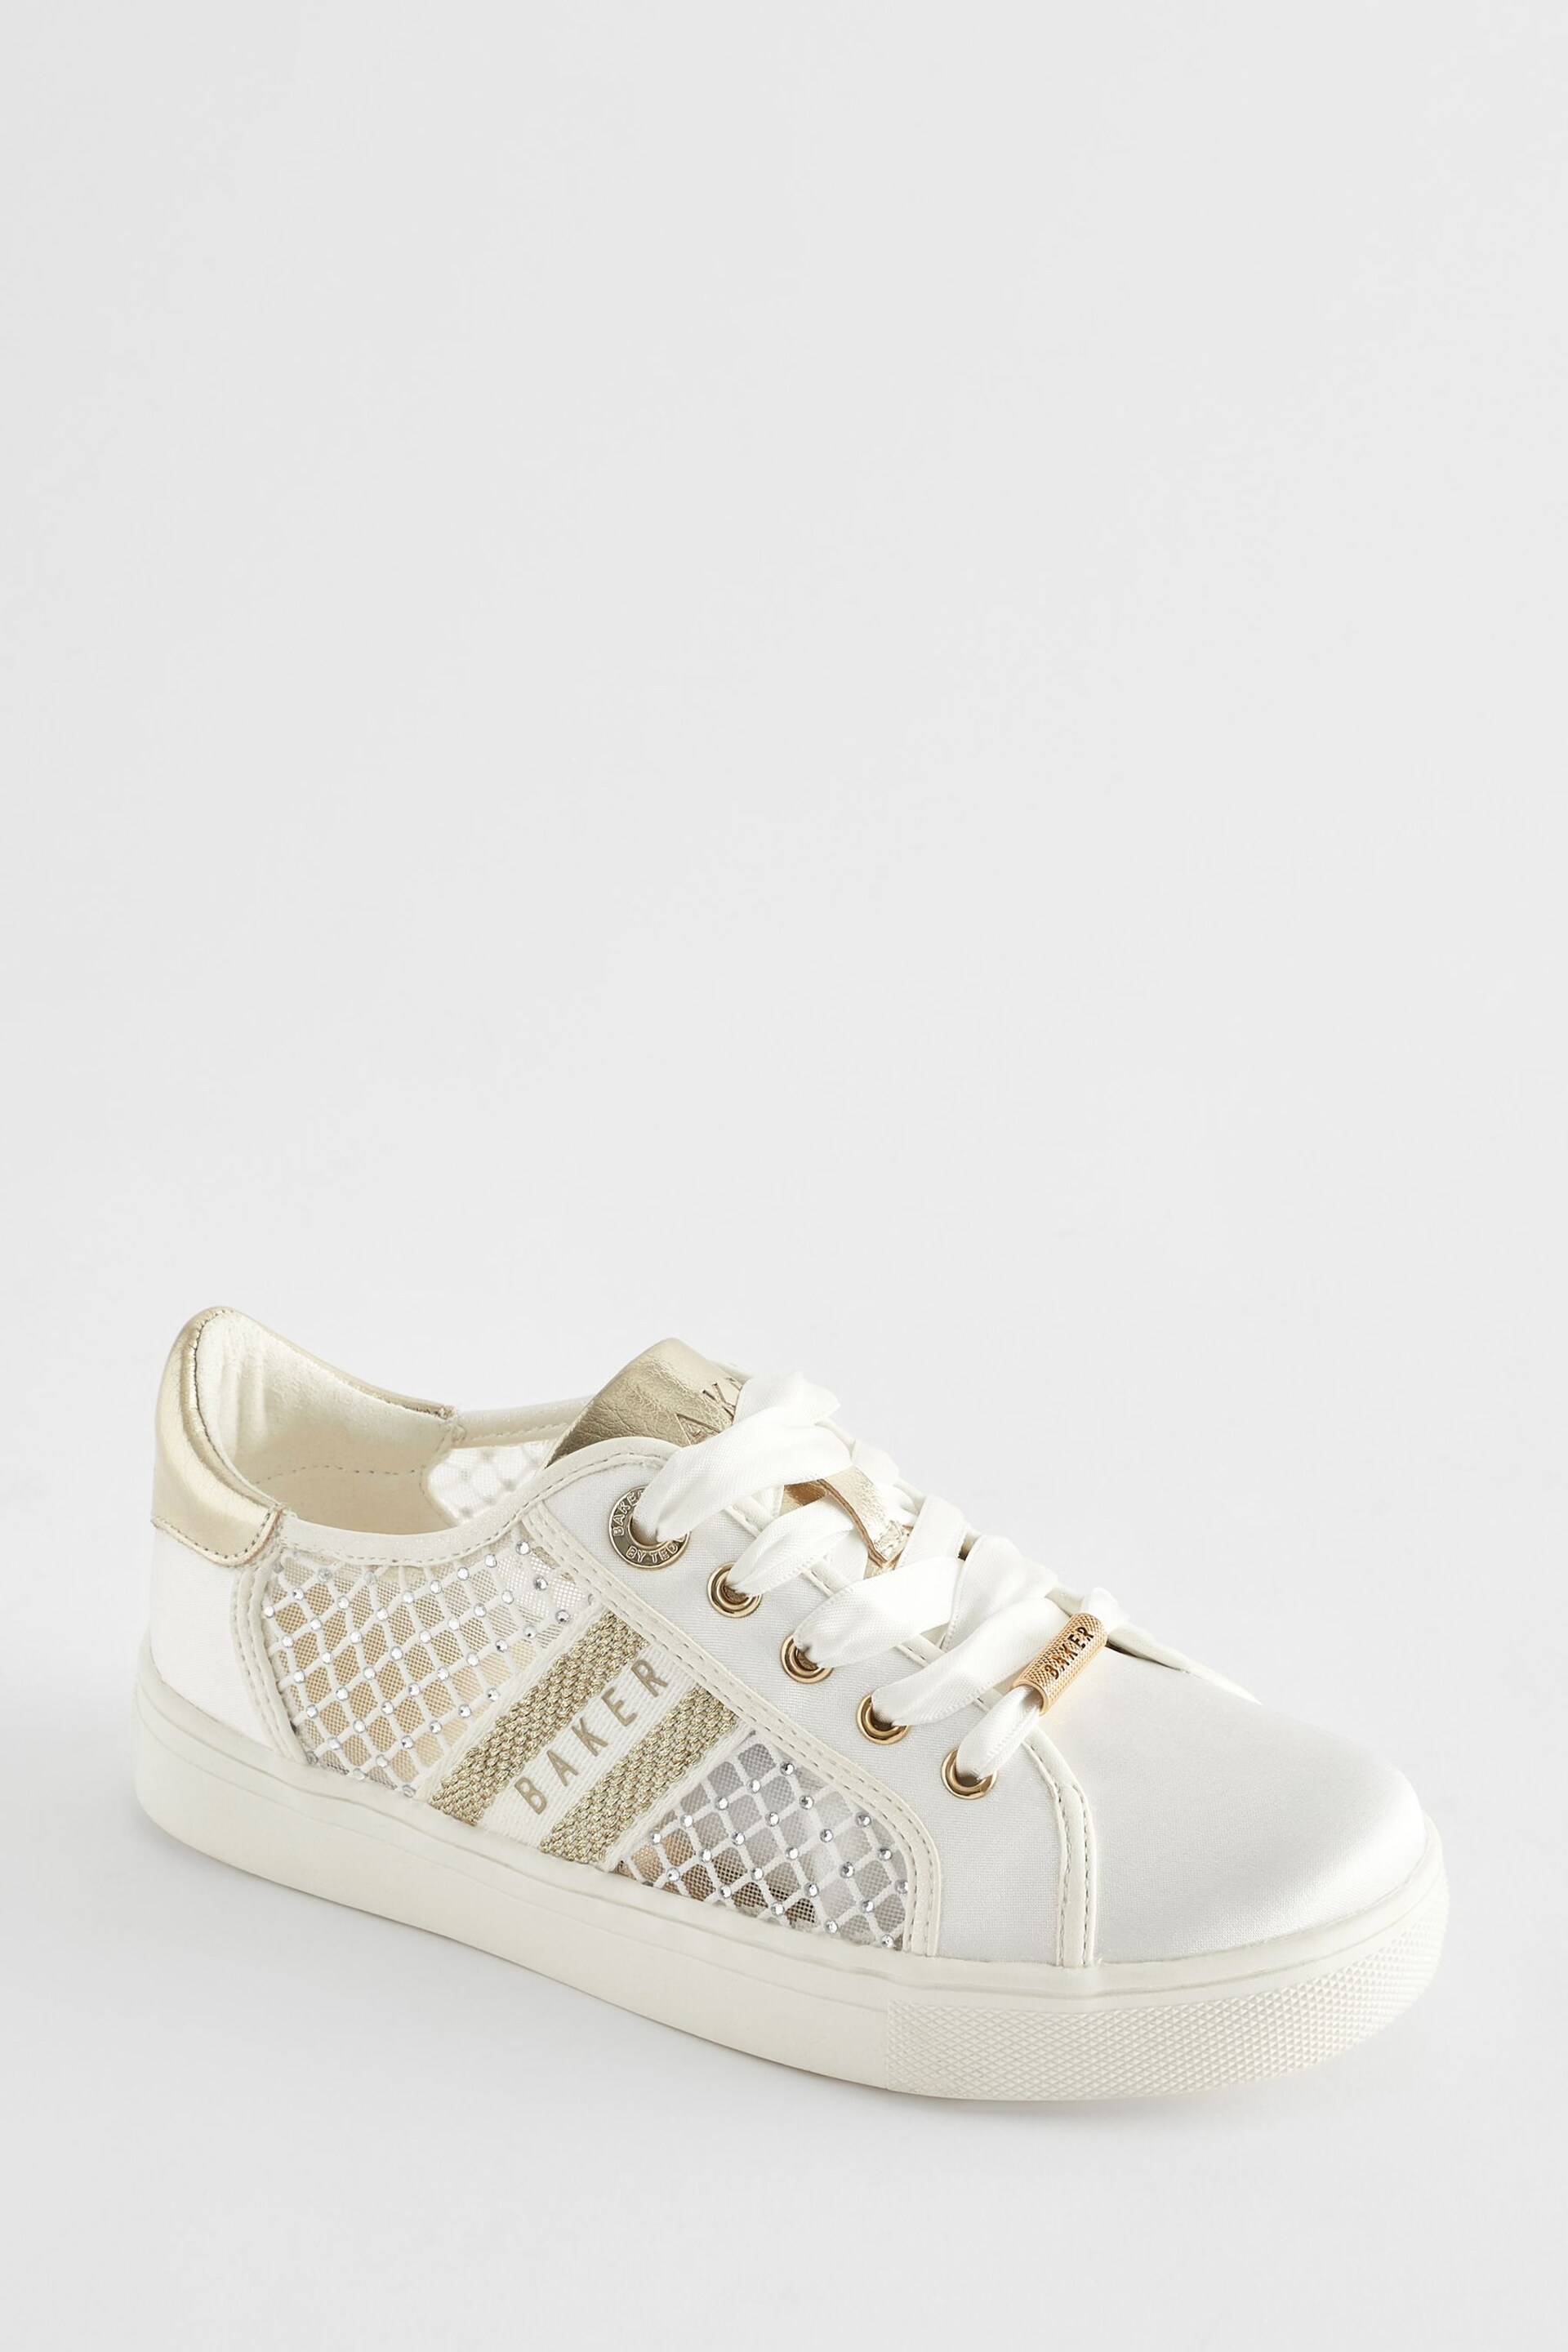 Baker by Ted Baker Girls Diamanté Lace Up Trainers - Image 1 of 7